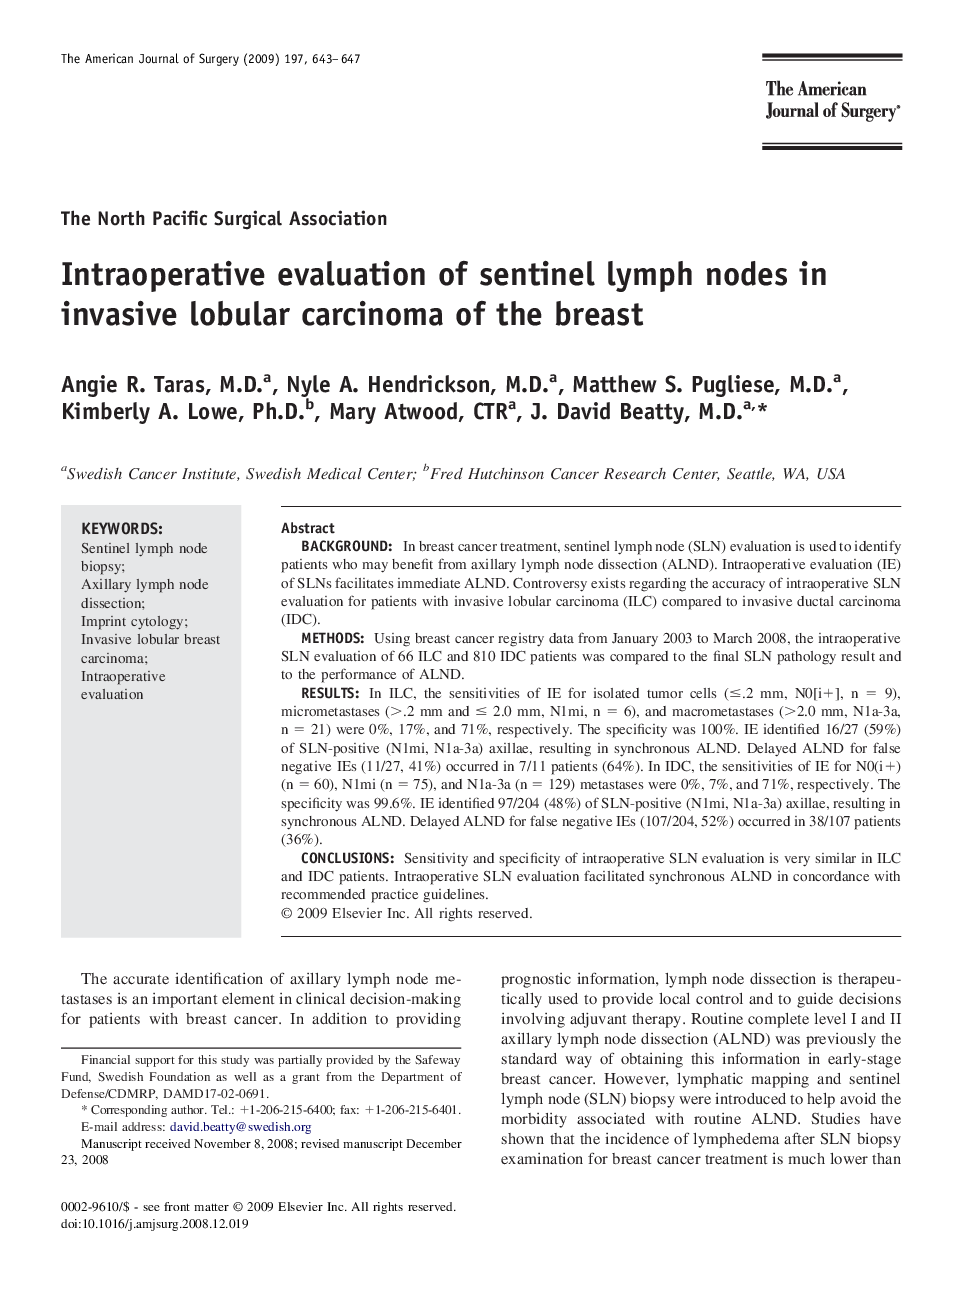 Intraoperative evaluation of sentinel lymph nodes in invasive lobular carcinoma of the breast